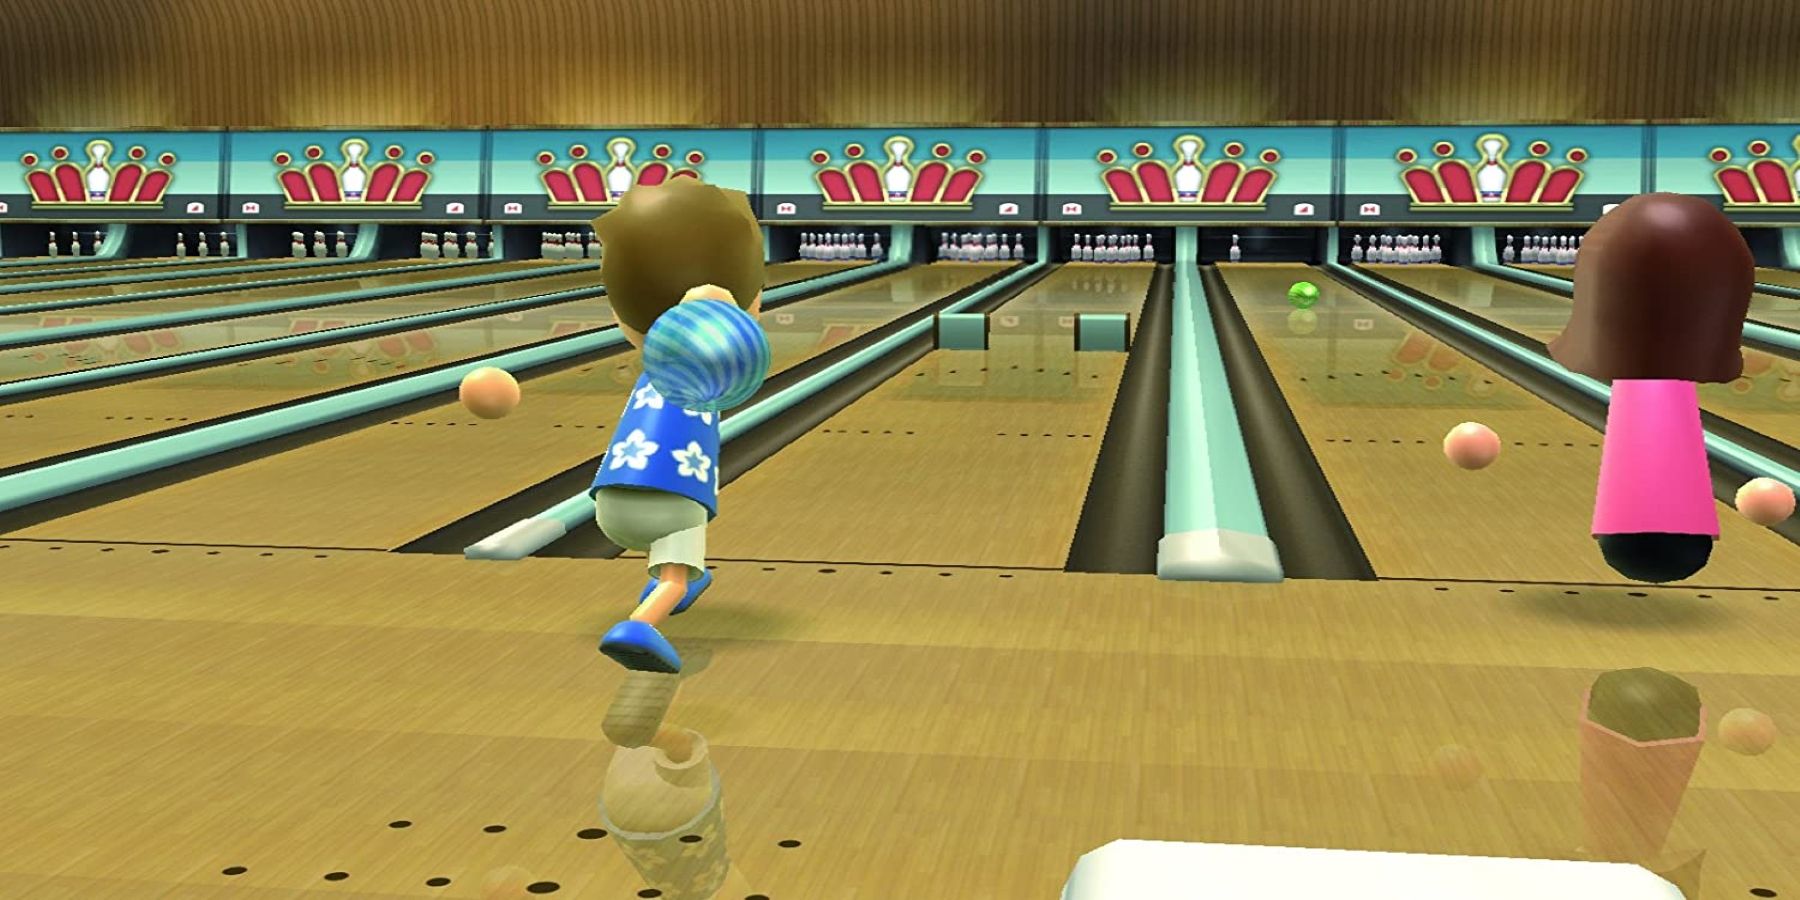 wii sports character bowling